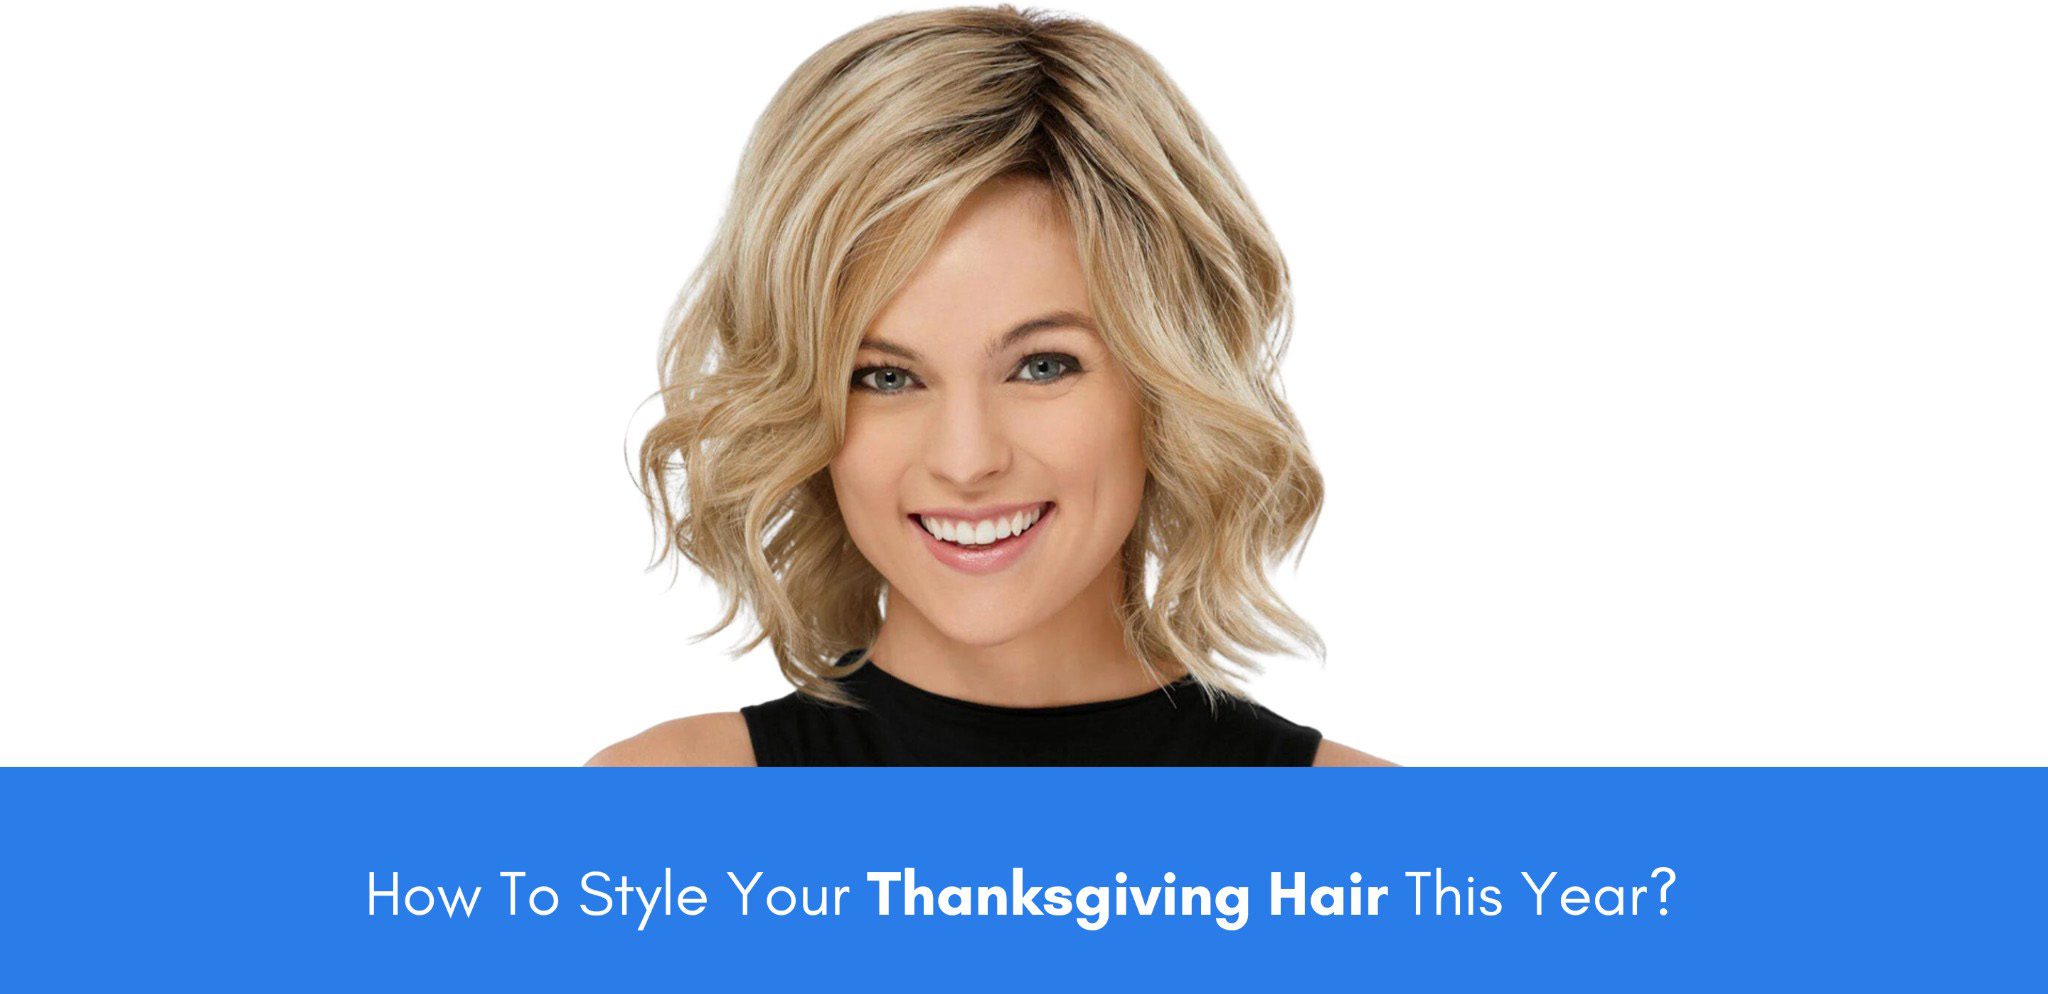 How To Style Your Thanksgiving Hair This Year?